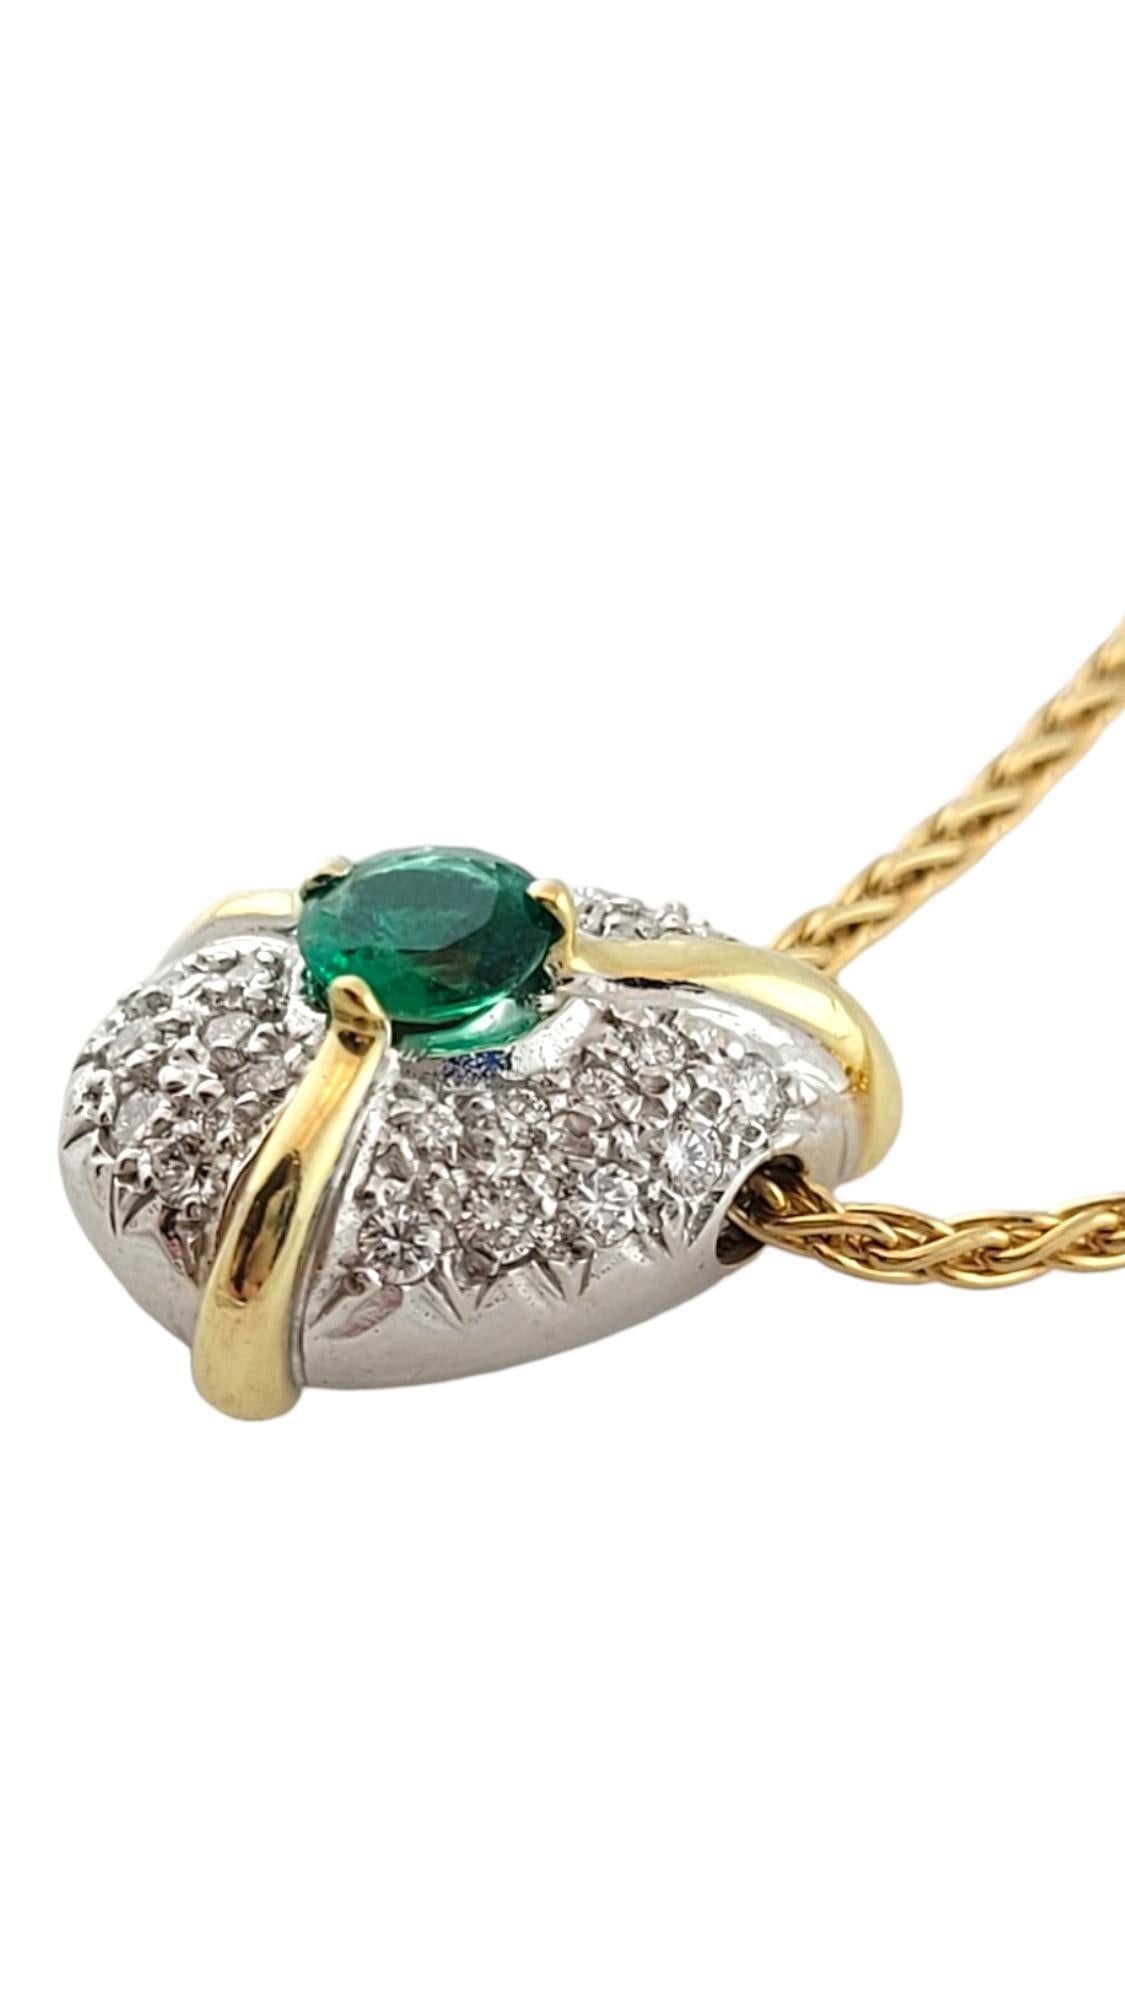 Round Cut 18K Yellow & White Gold Pave Diamond & Emerald Pendant Necklace #16246 For Sale